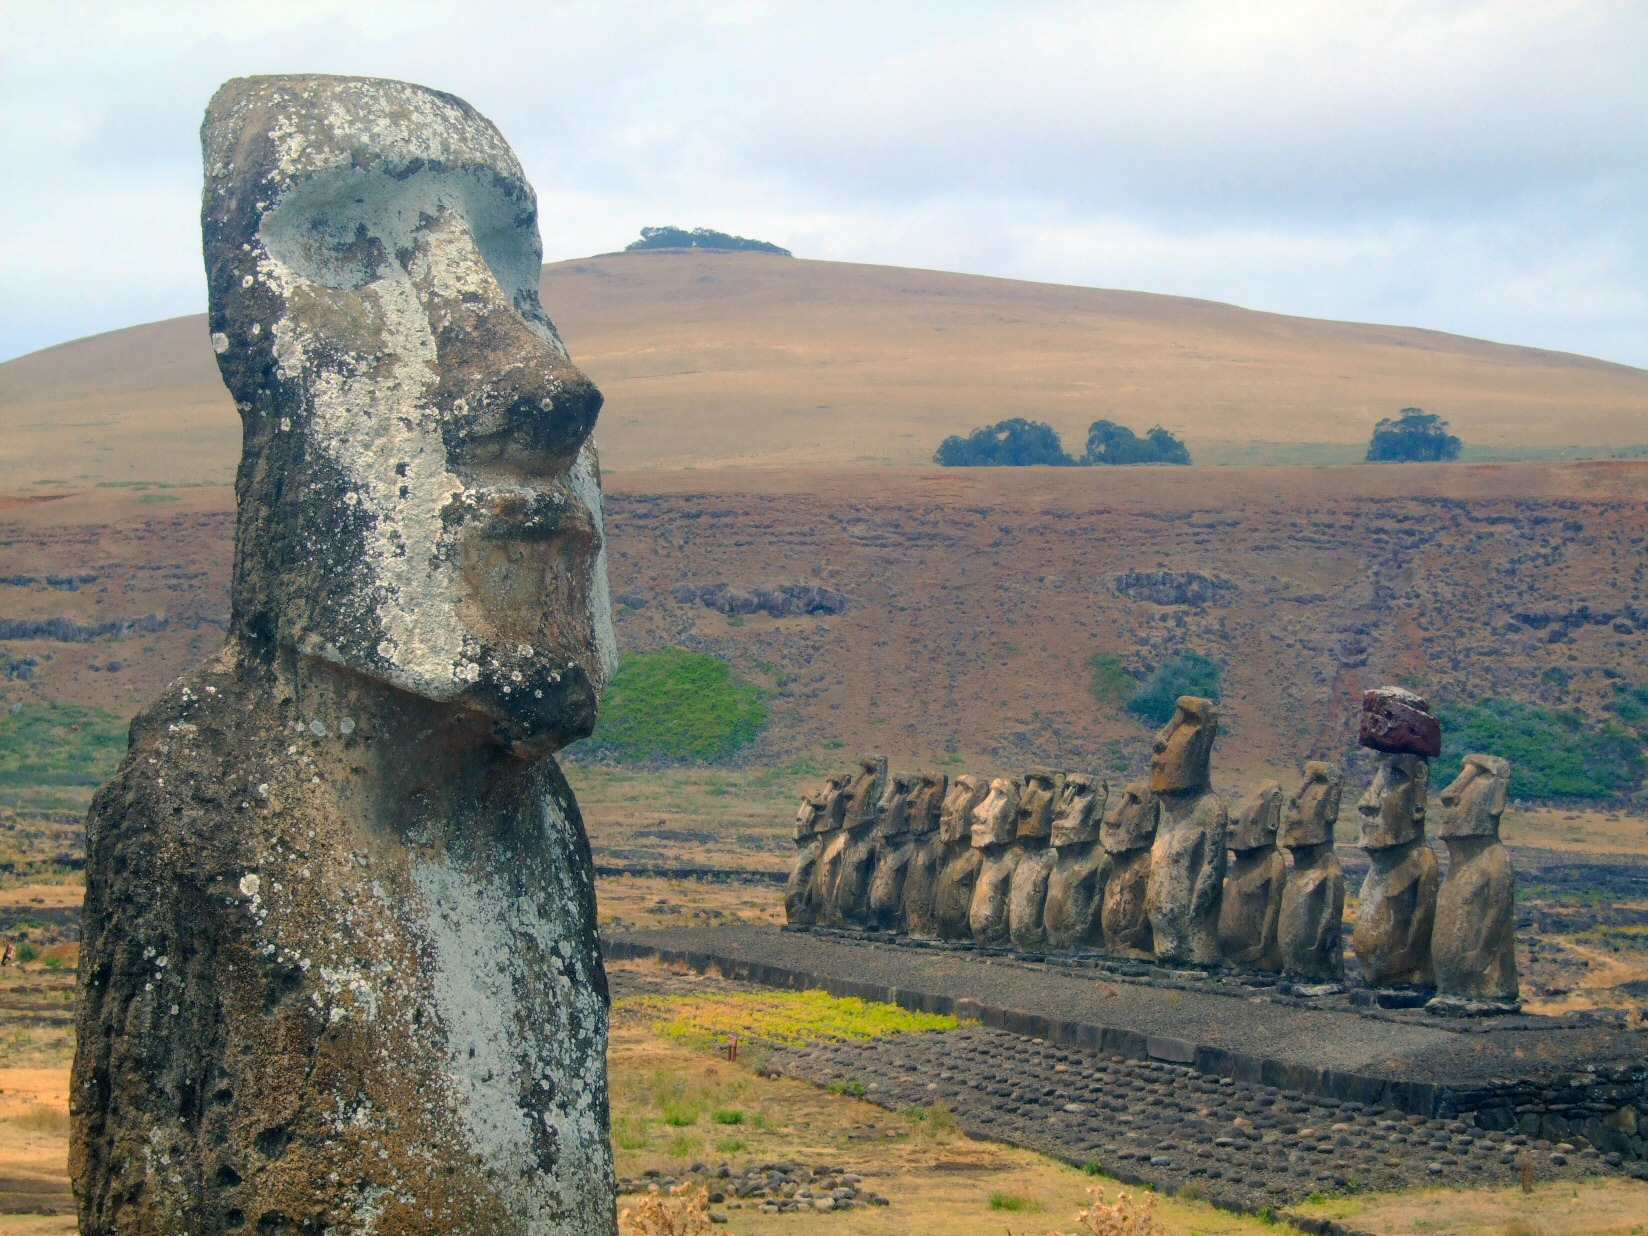 Easter Island, back to the past